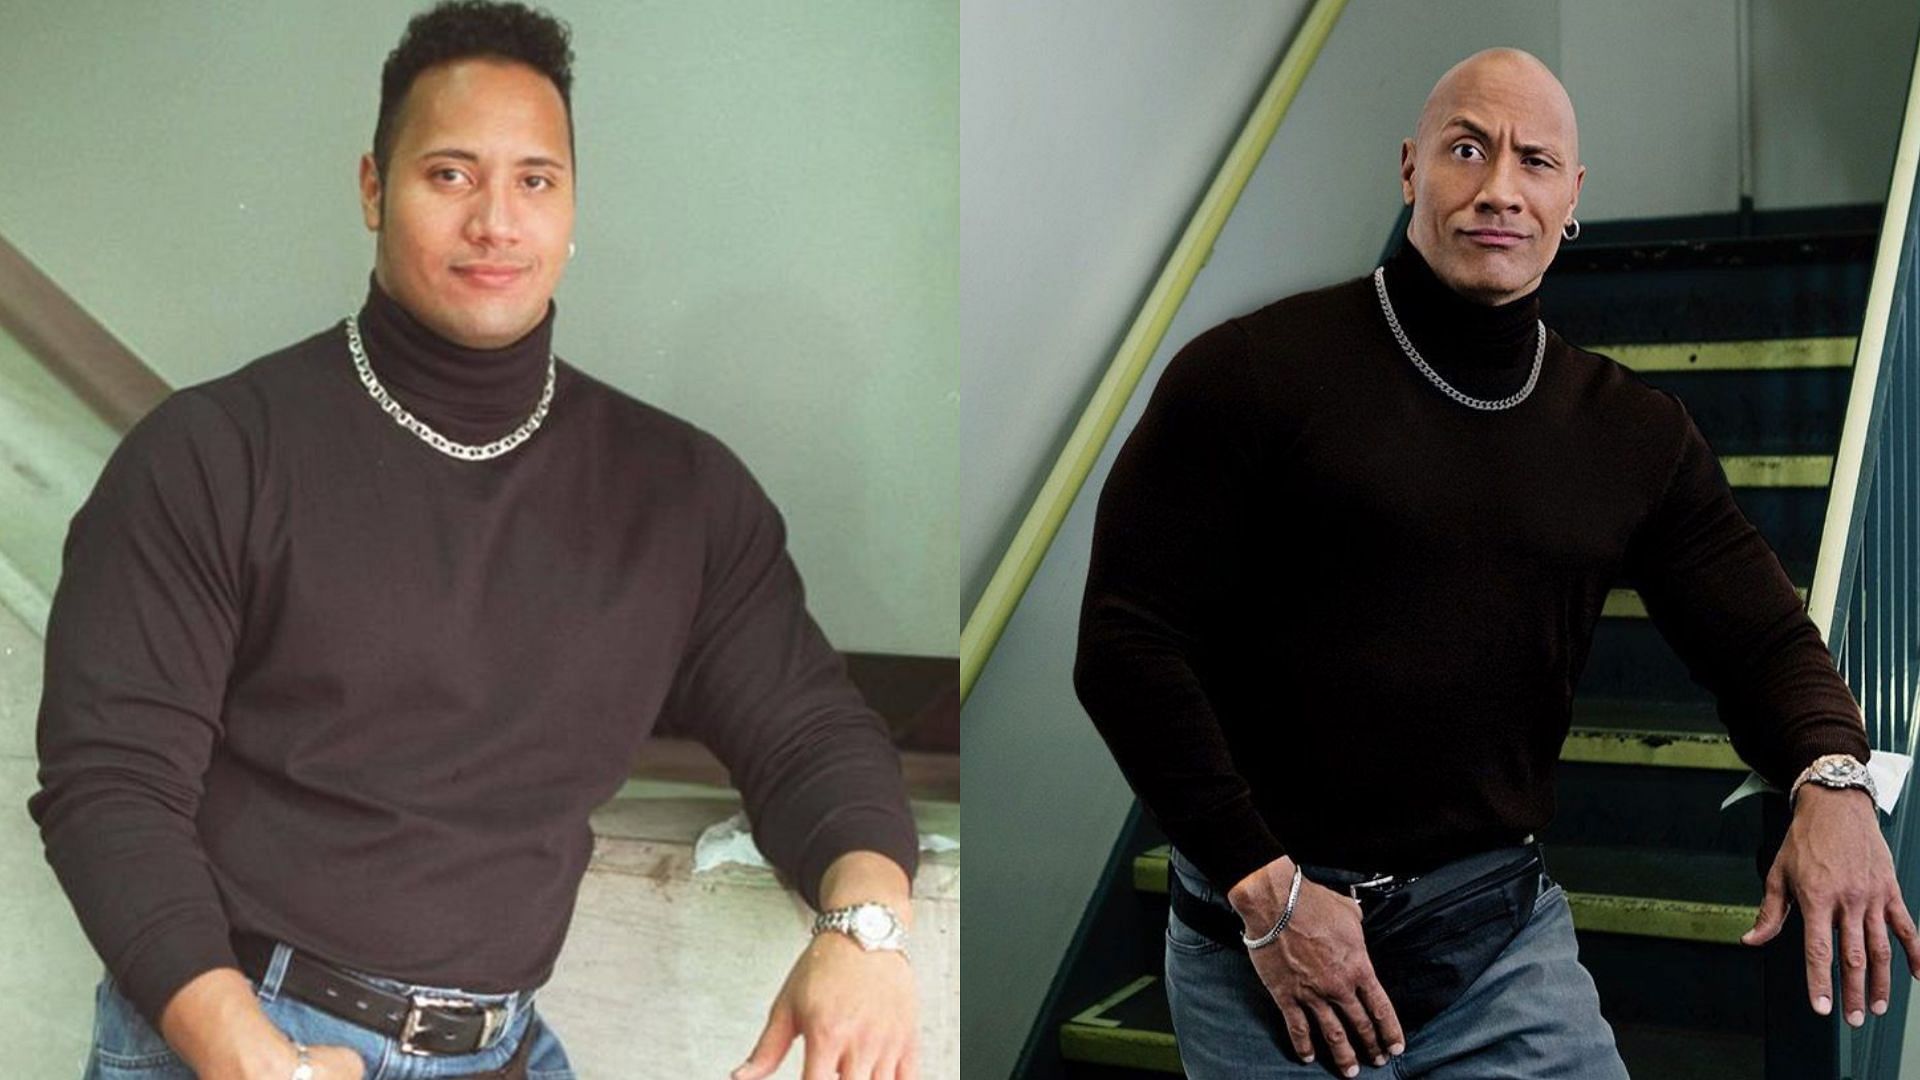 Dwayne 'The Rock' Johnson reveals what was in his fanny pack in famous 90s  photo